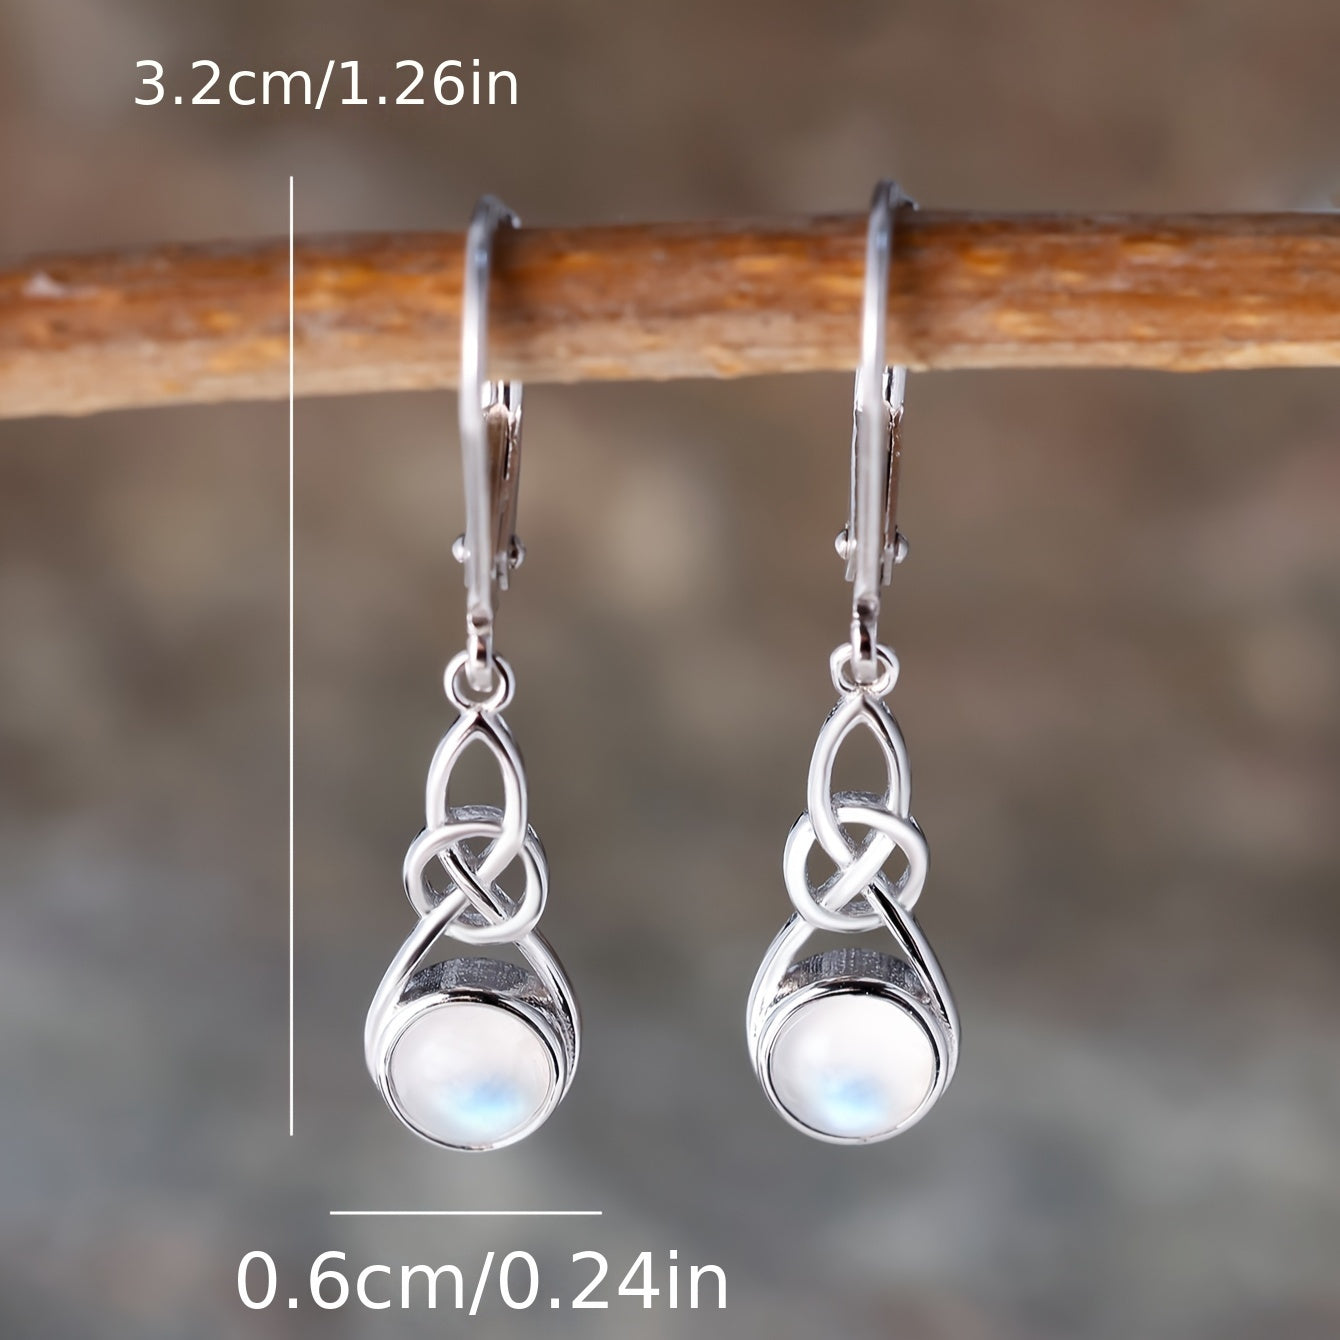 Sterling 925 Silver Hypoallergenic Ear Jewelry Natural Synthetic Gems Decor Dangle Earrings Delicate Female Gift